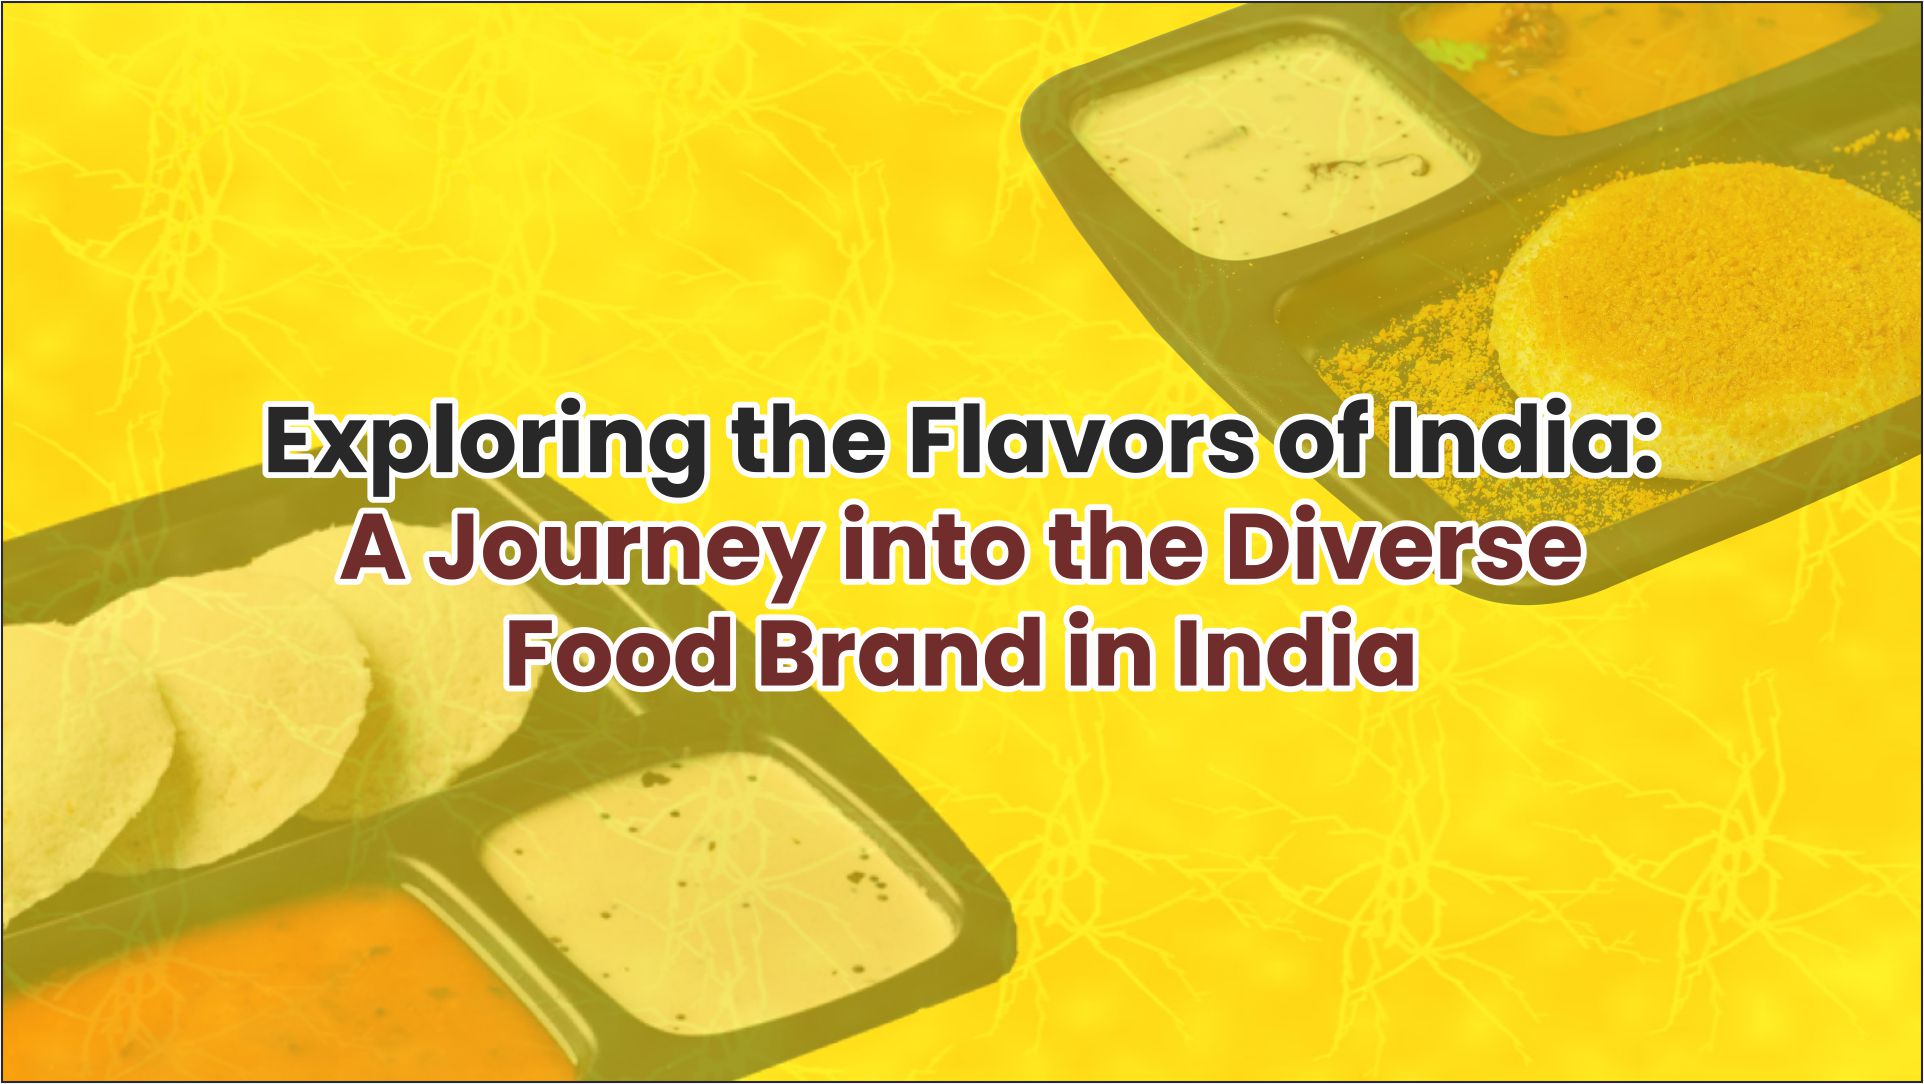 Exploring the Flavors of India: A Journey into the Diverse Food Brand in India